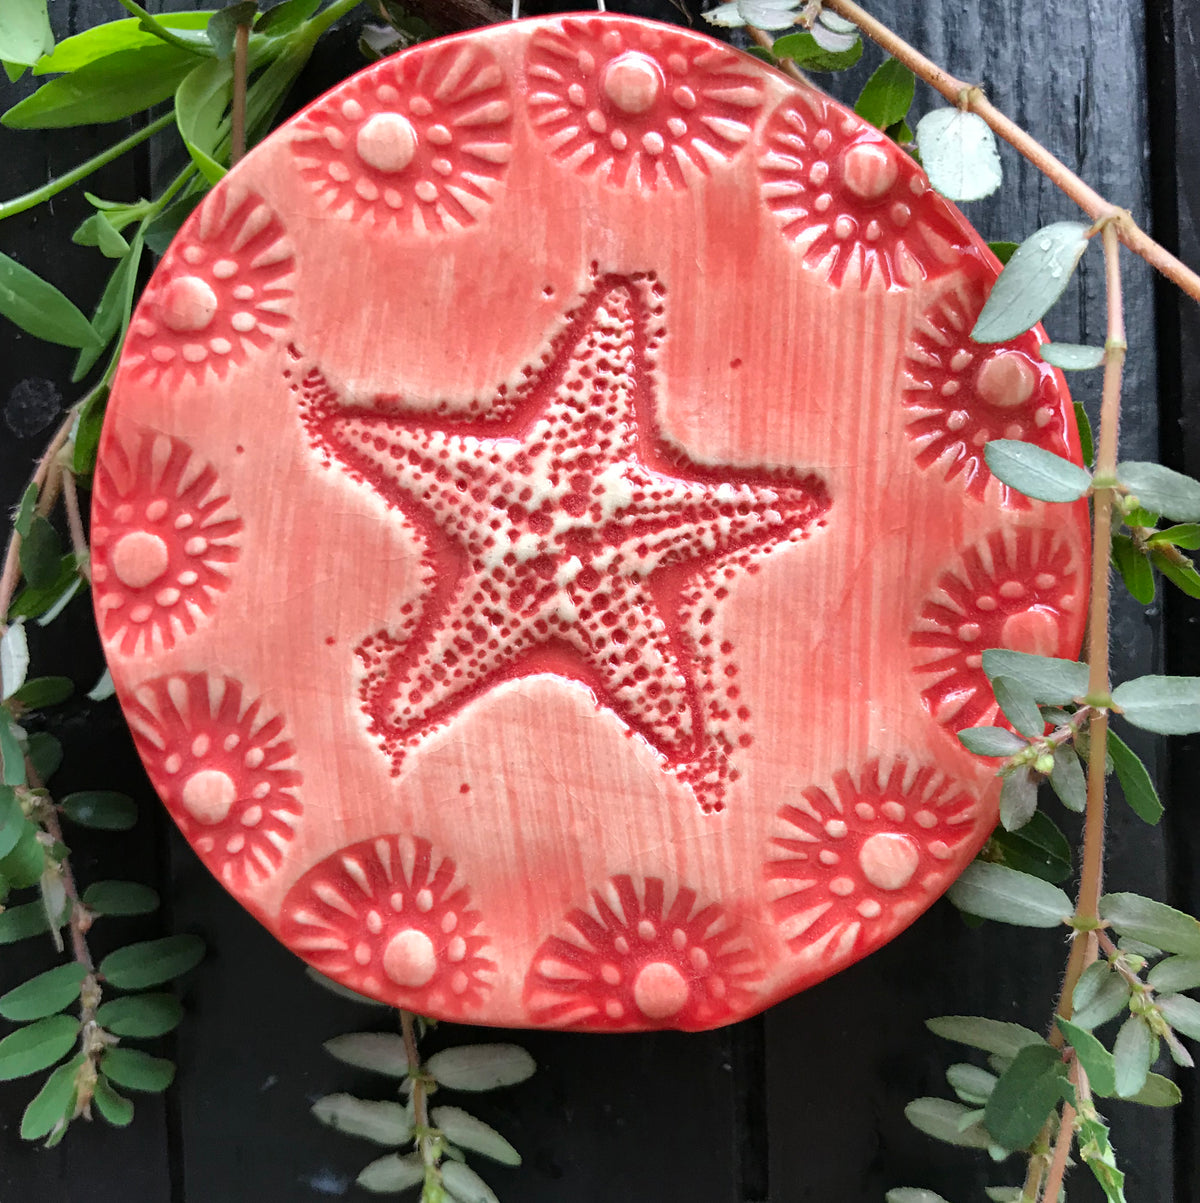 Our starfish ornament in red glaze is ready for the Christmas Tree.   Handmade and each varies.